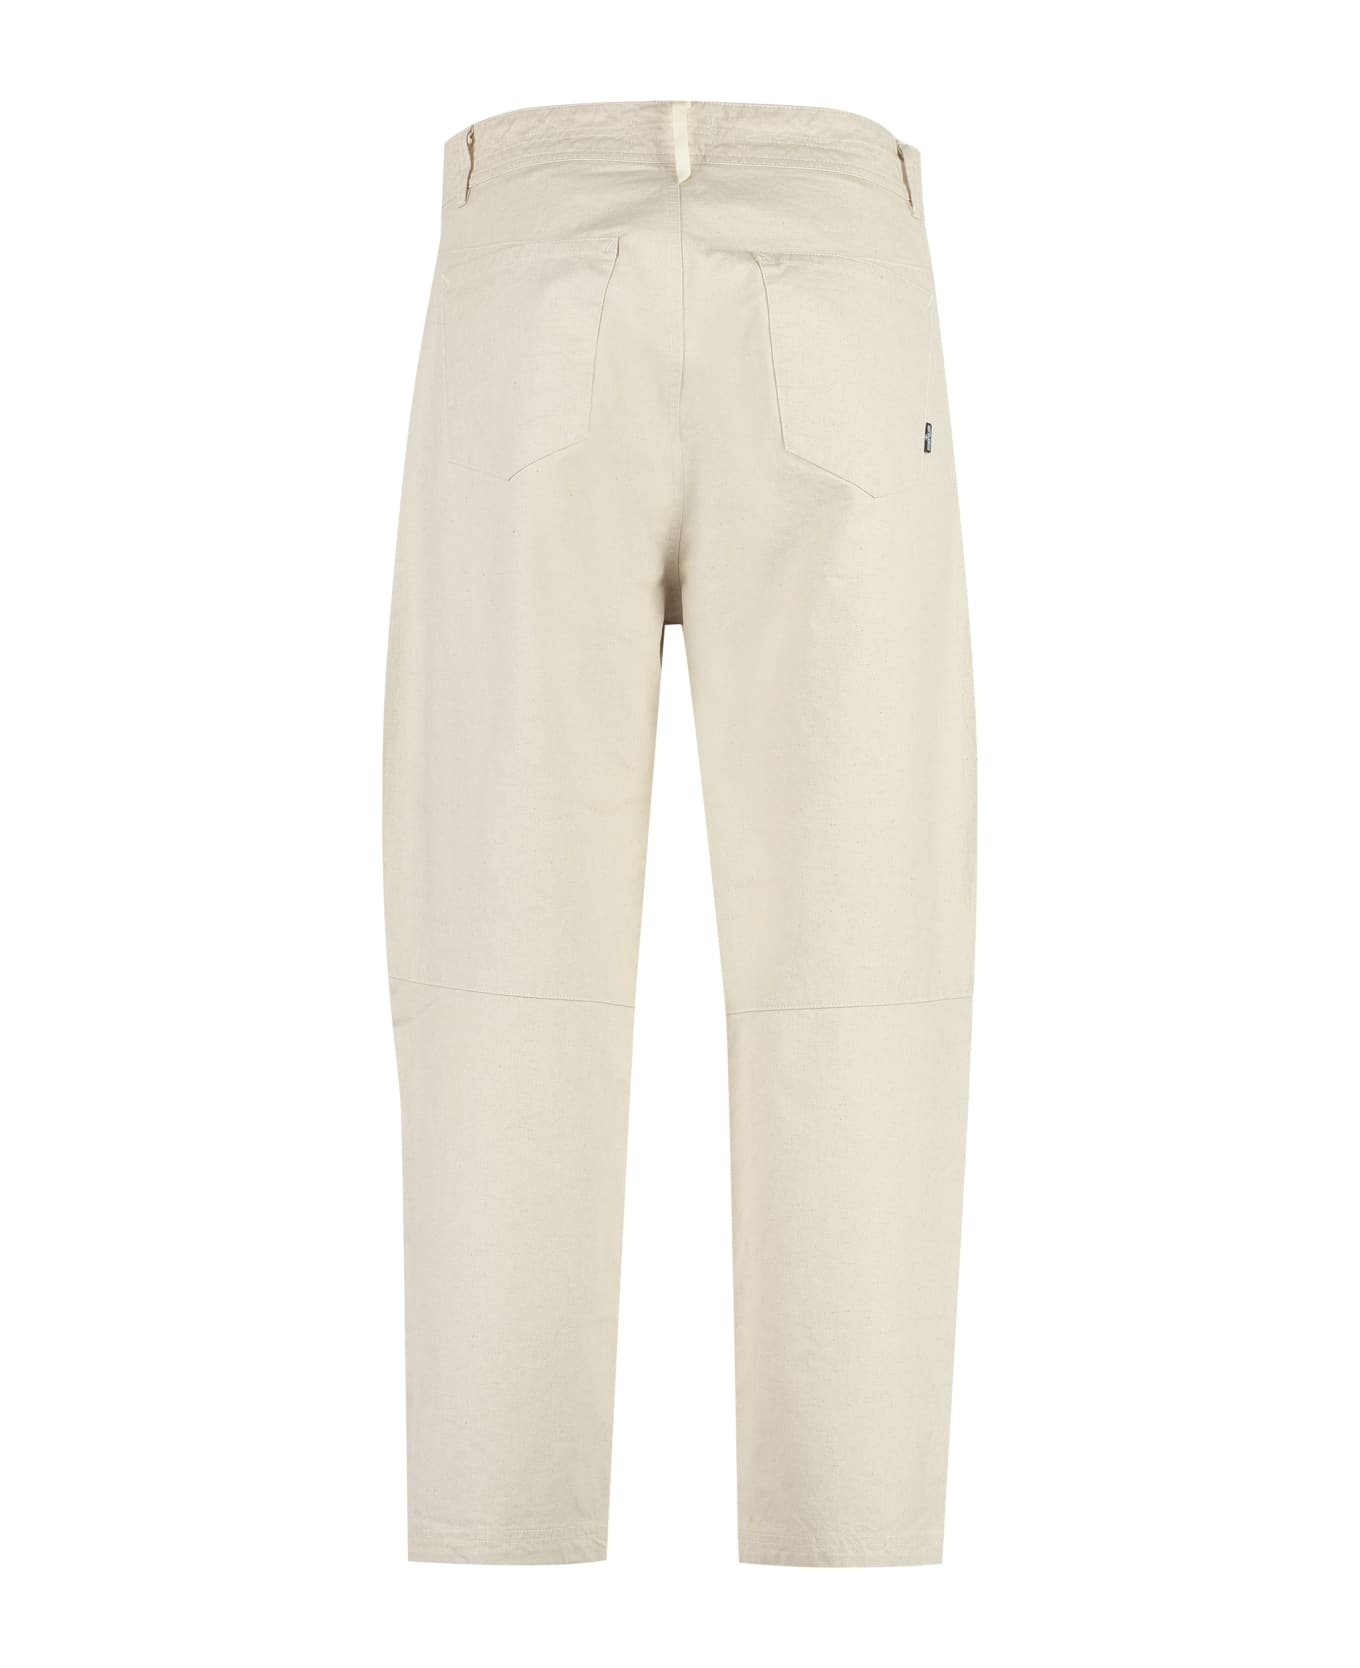 Stone Island Shadow Project Cotton Blend Trousers - Sand ボトムス